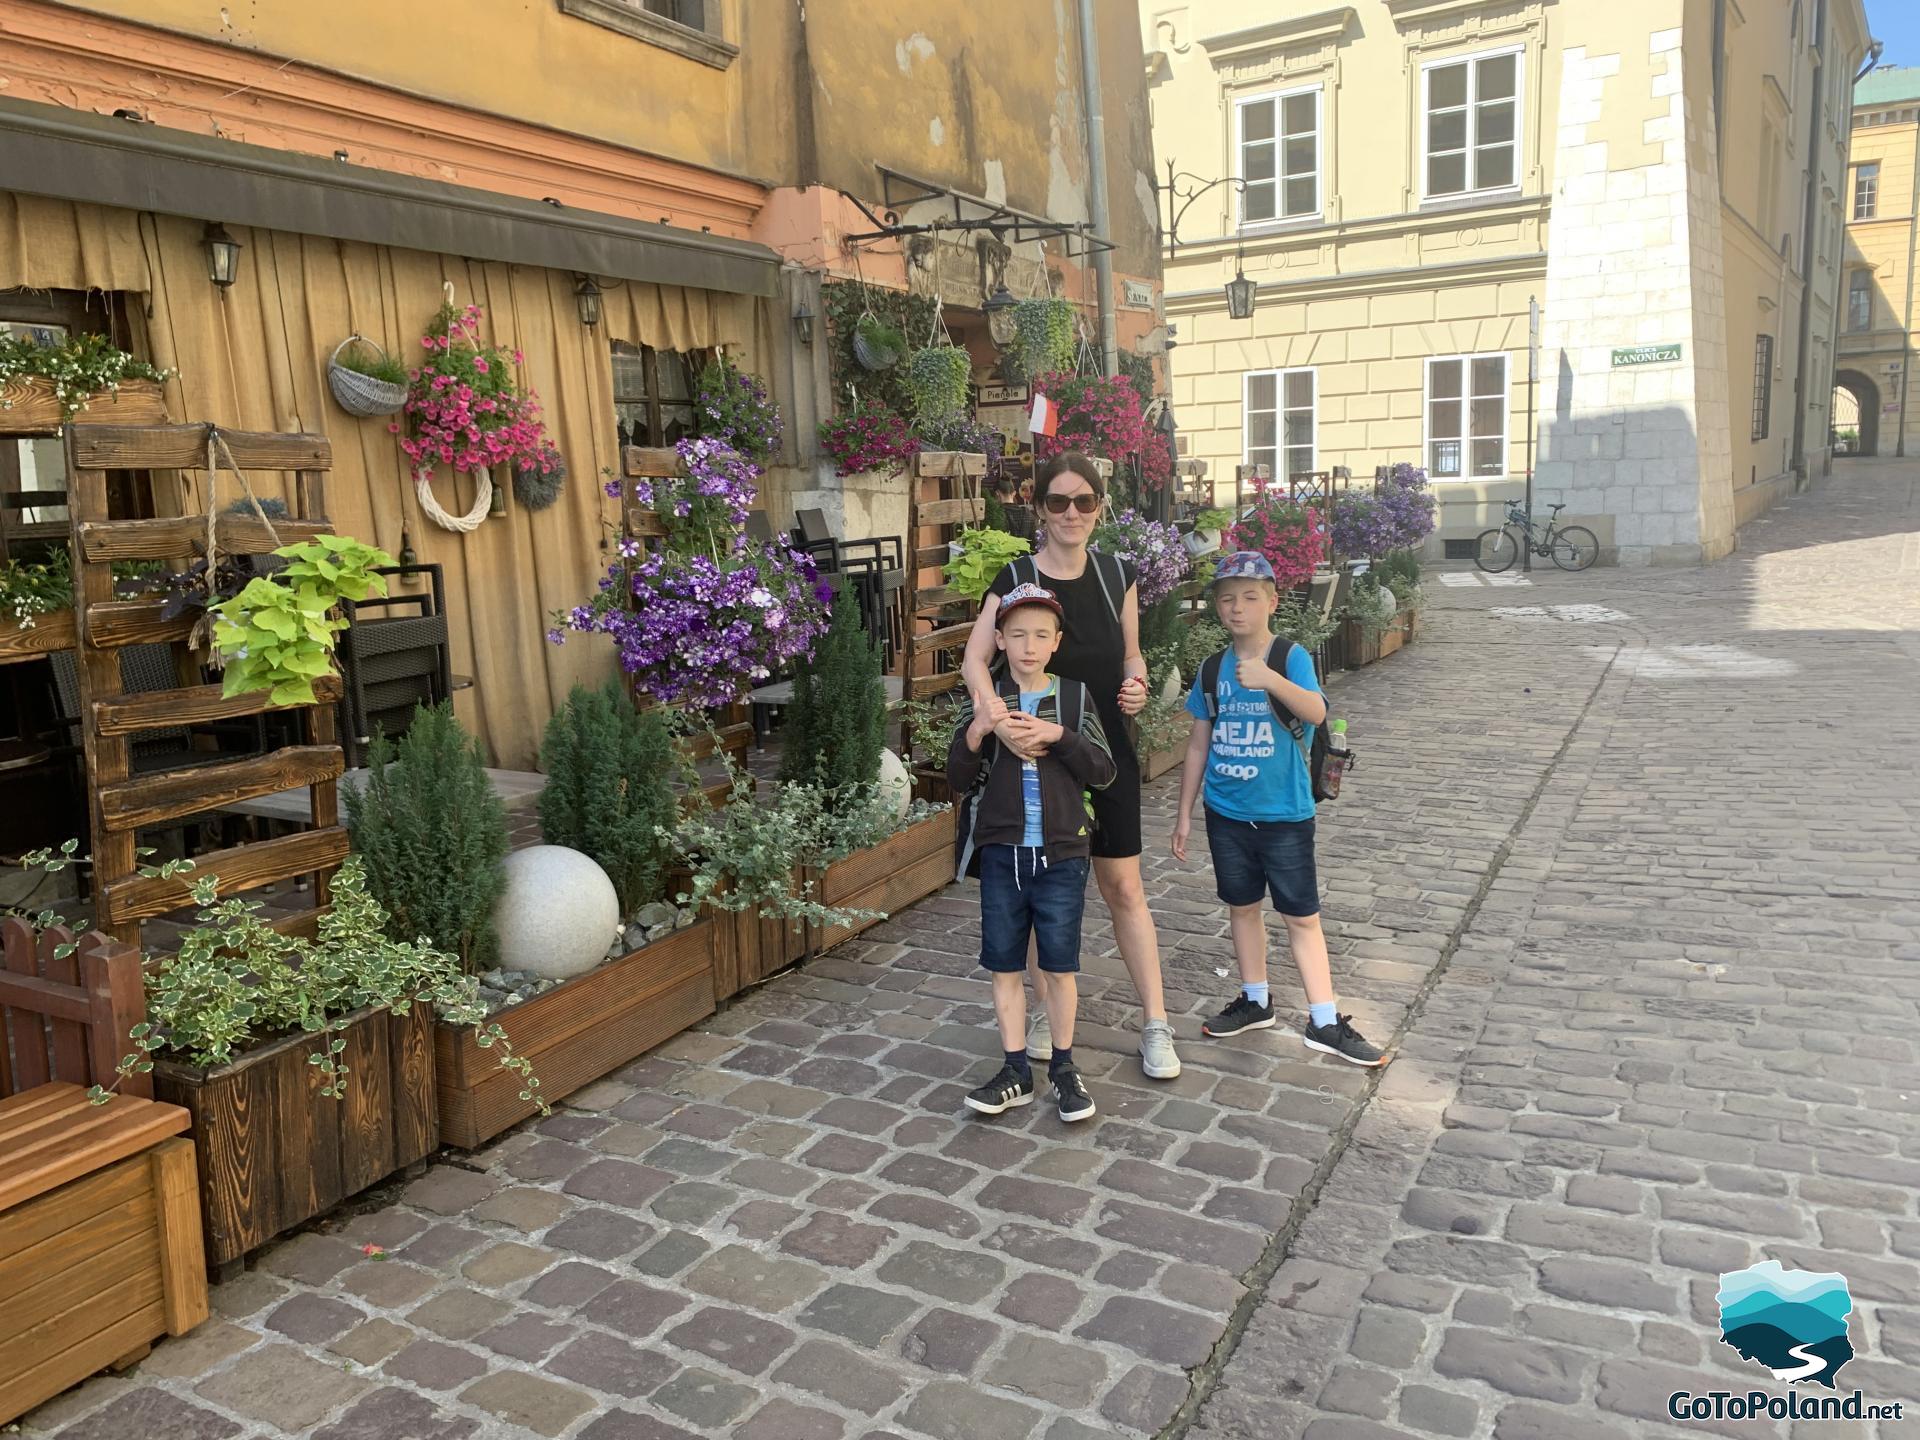 cobbled alley, on the left lots of flowers, two boys and a woman are standing next to the flowers